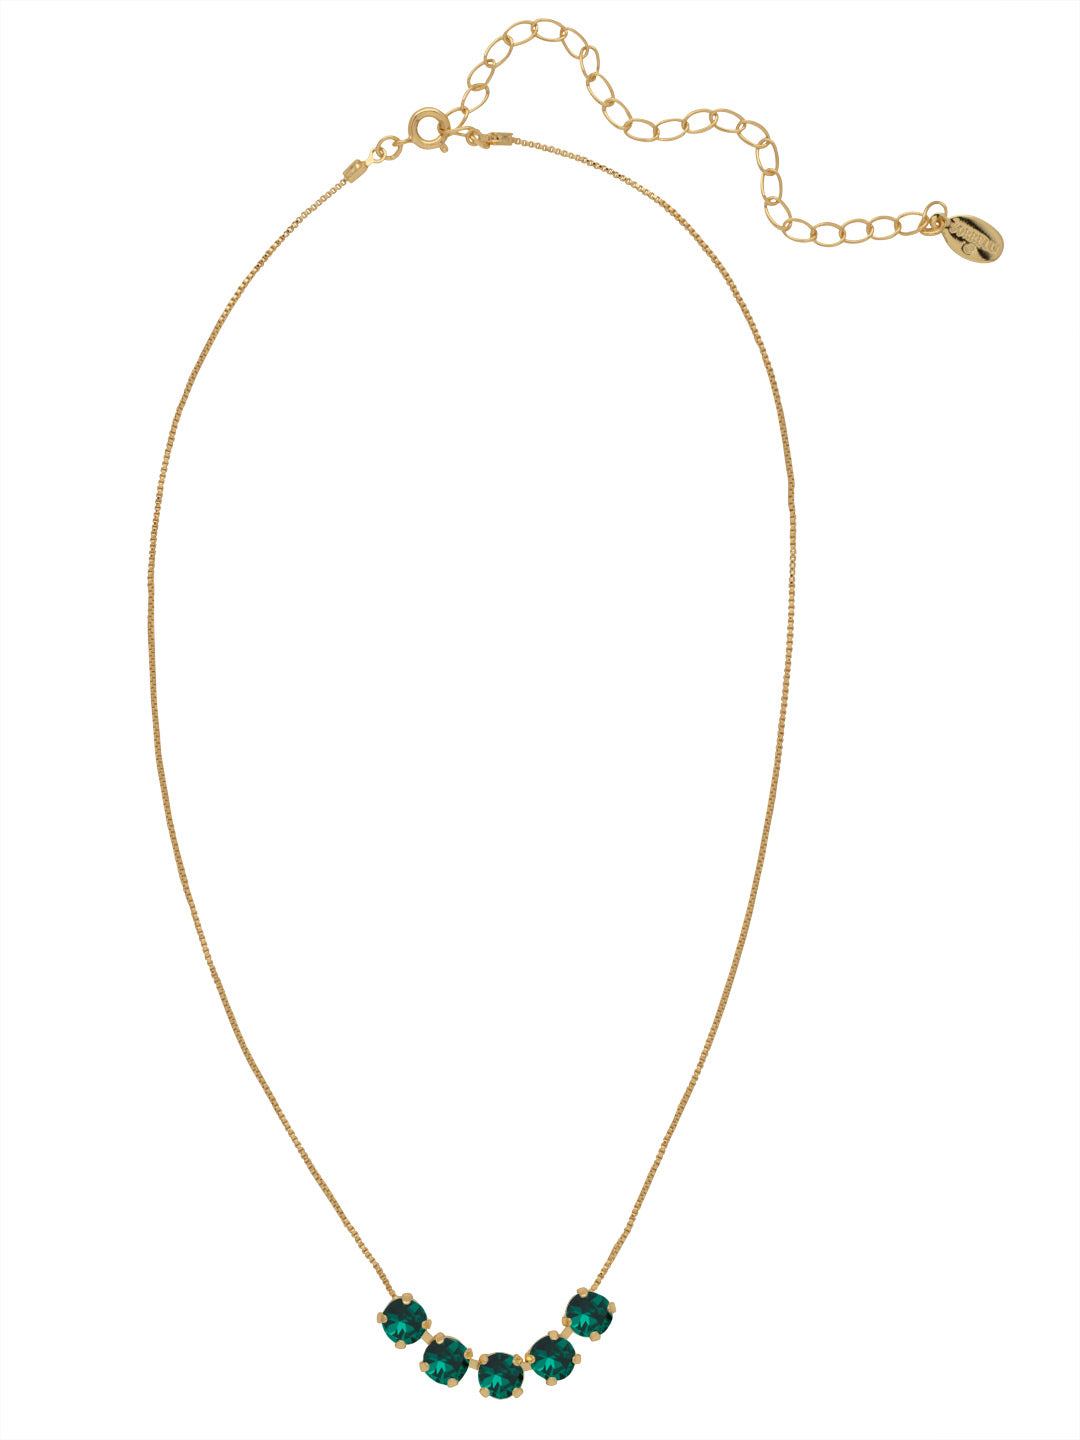 Shaughna Tennis Necklace - NFC84BGEME - <p>The Shaughna Tennis Necklace features five crystals on a delicate adjustable chain. From Sorrelli's Emerald collection in our Bright Gold-tone finish.</p>